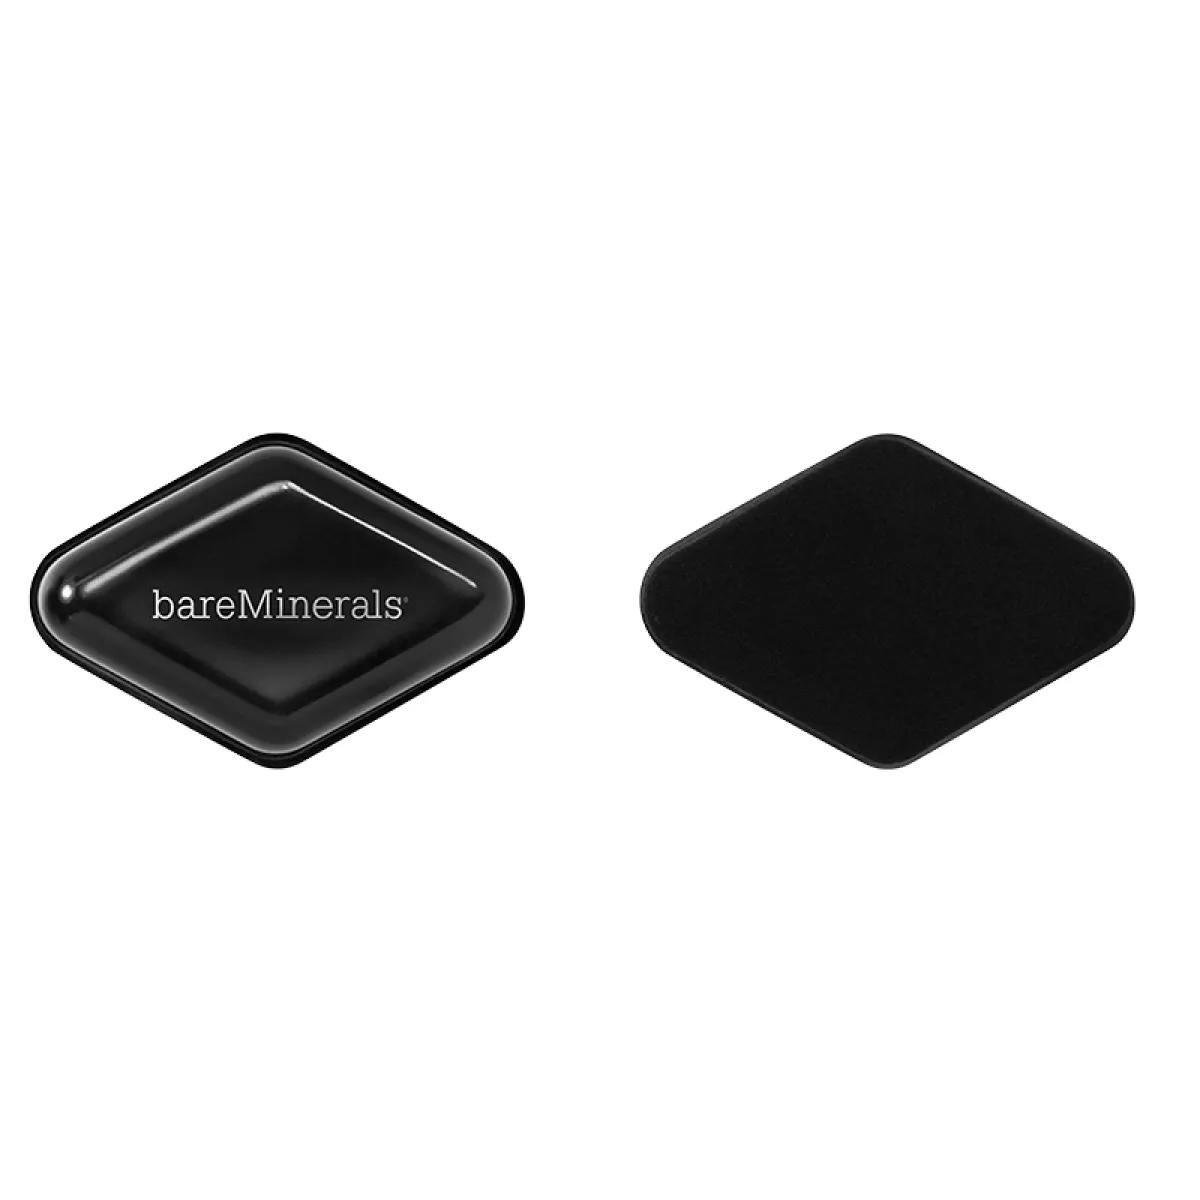 #1 - bareMinerals Dual-Sided Silicone Blender (1 stk)